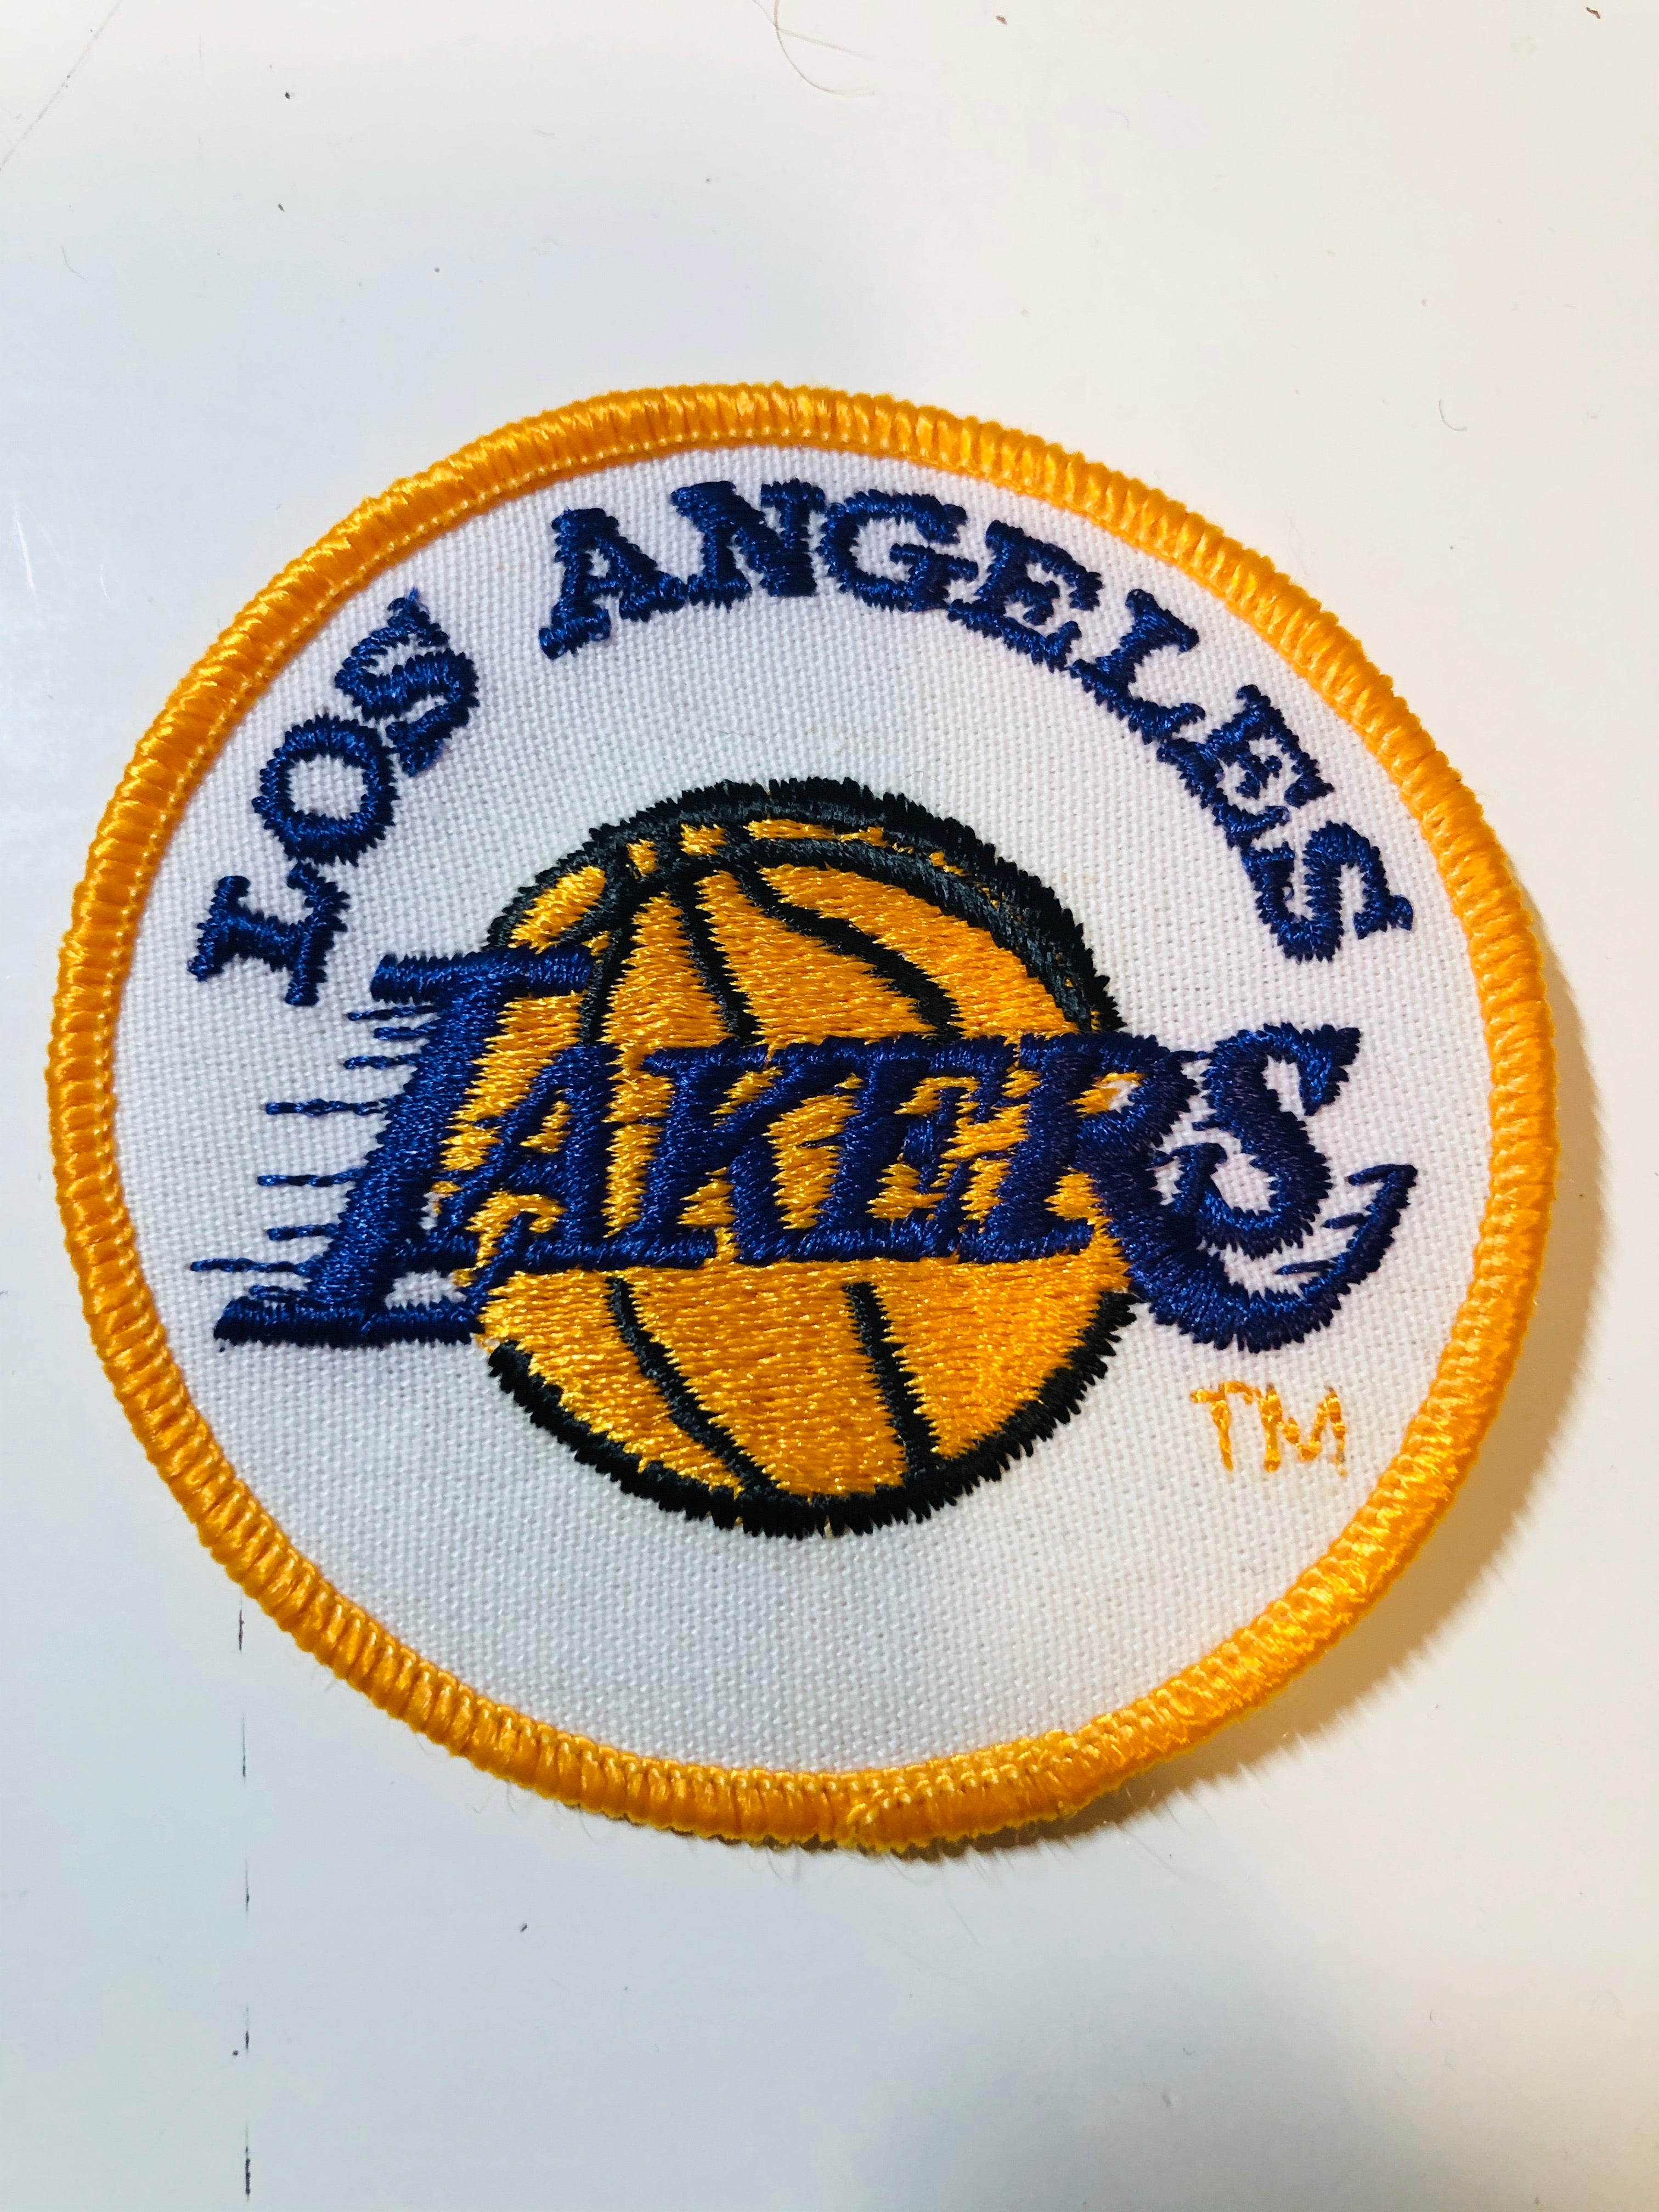 Los Angeles Lakers vintage 3x3 basketball patch 1970s